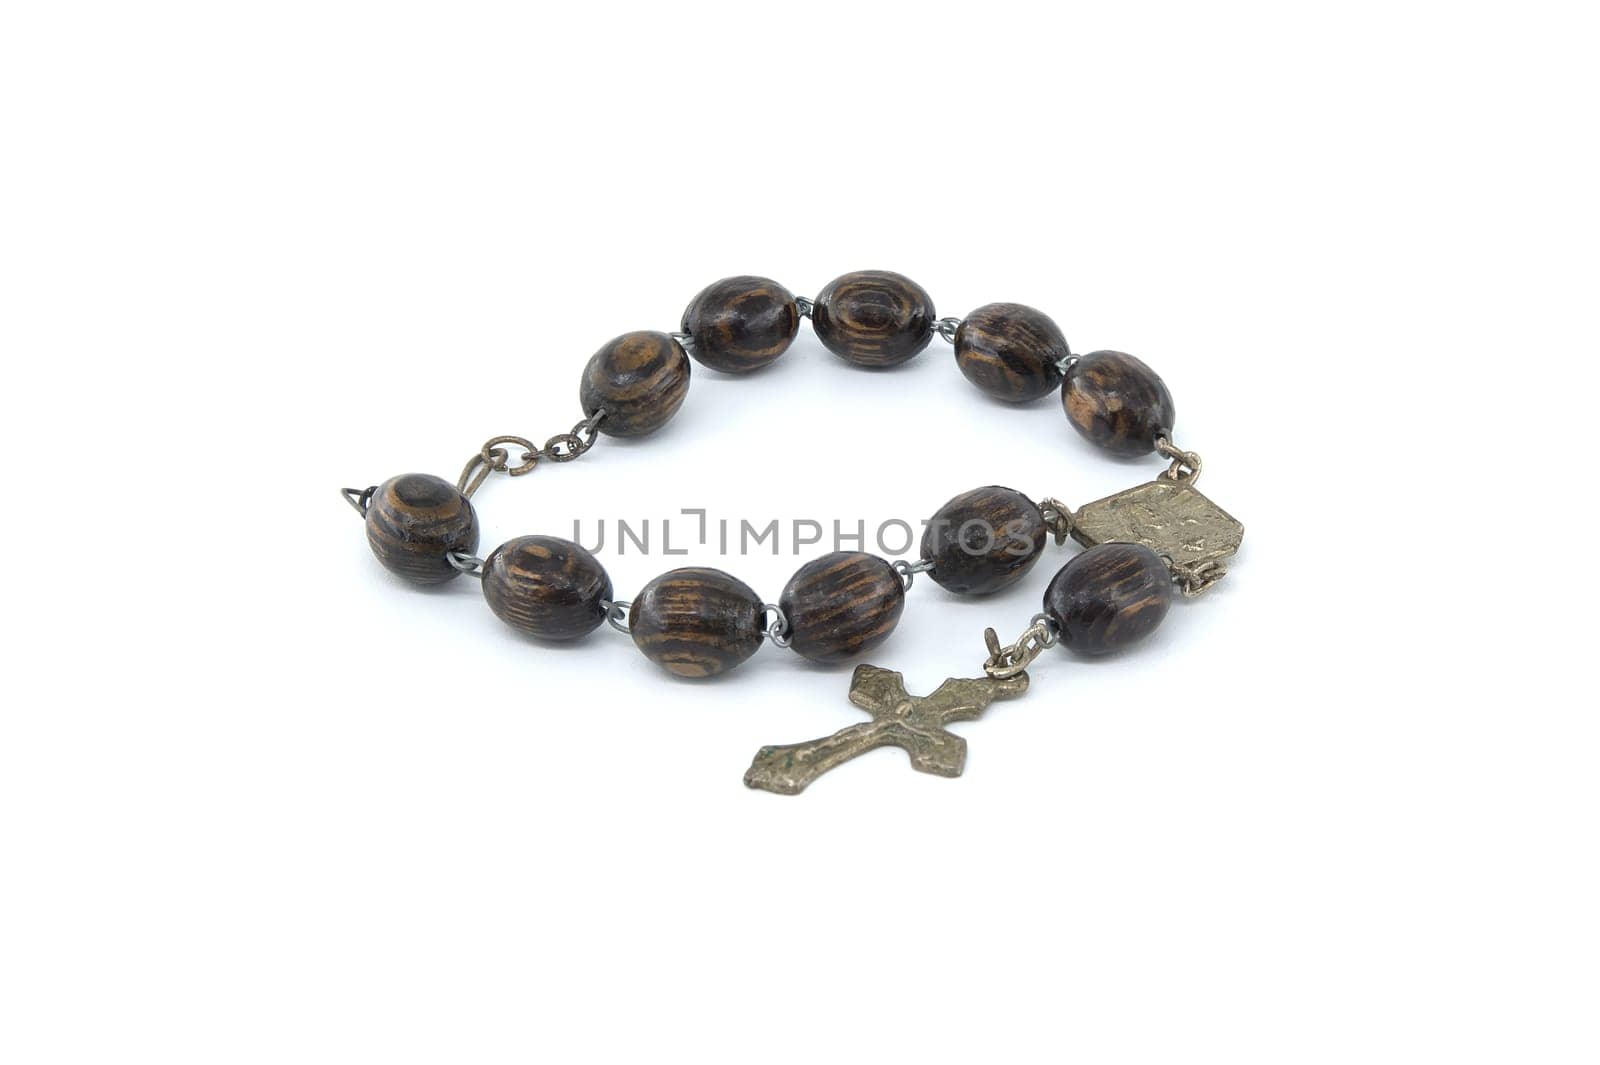 Rosary with wooden beads and a crucifix isolated on white background